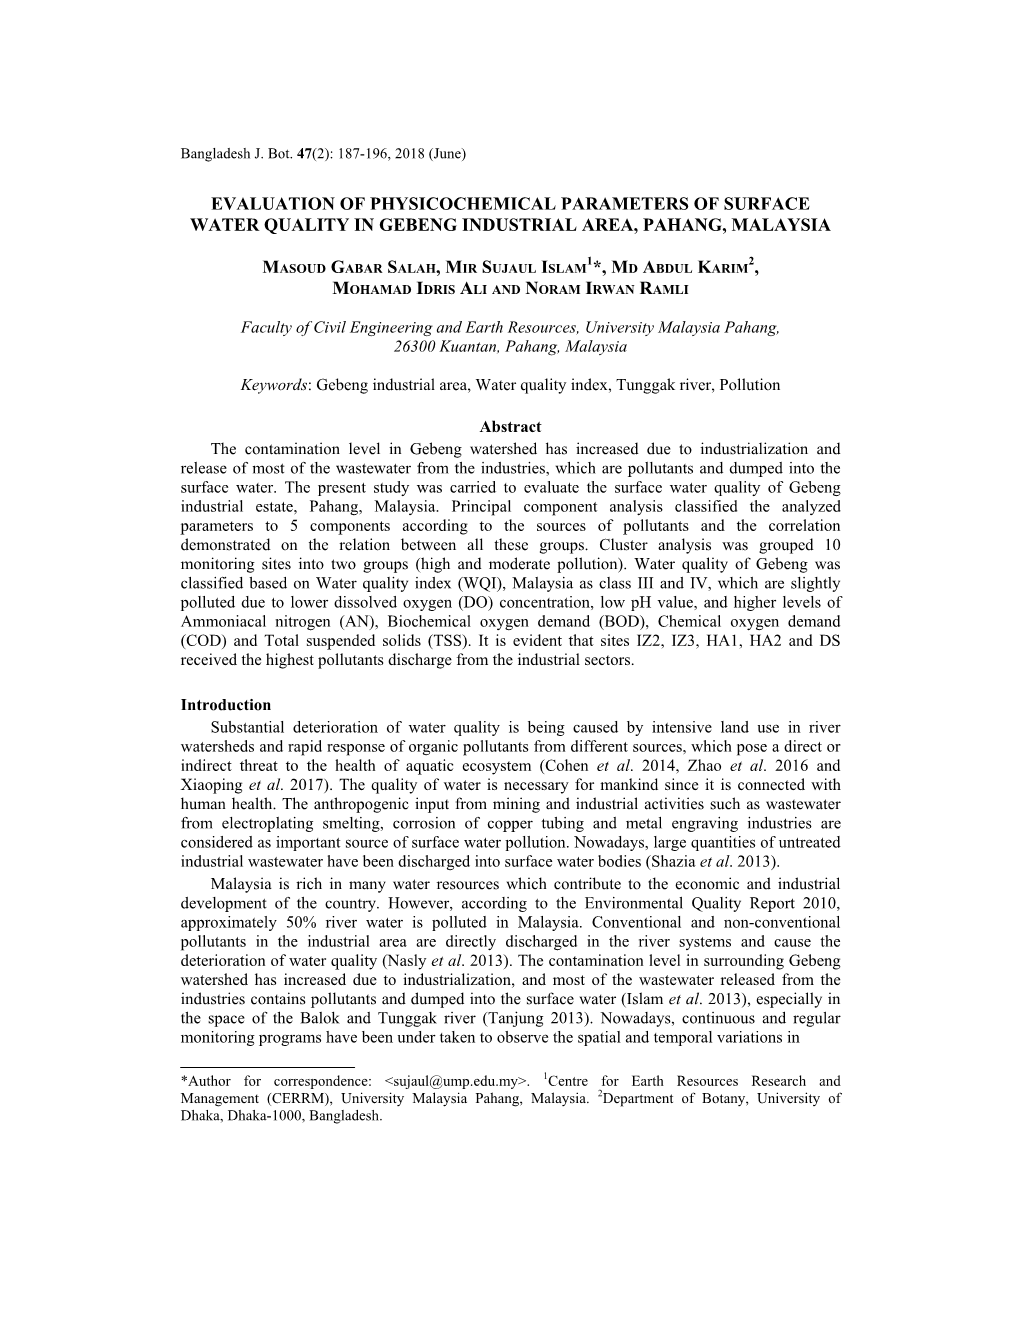 Evaluation of Physicochemical Parameters of Surface Water Quality in Gebeng Industrial Area, Pahang, Malaysia